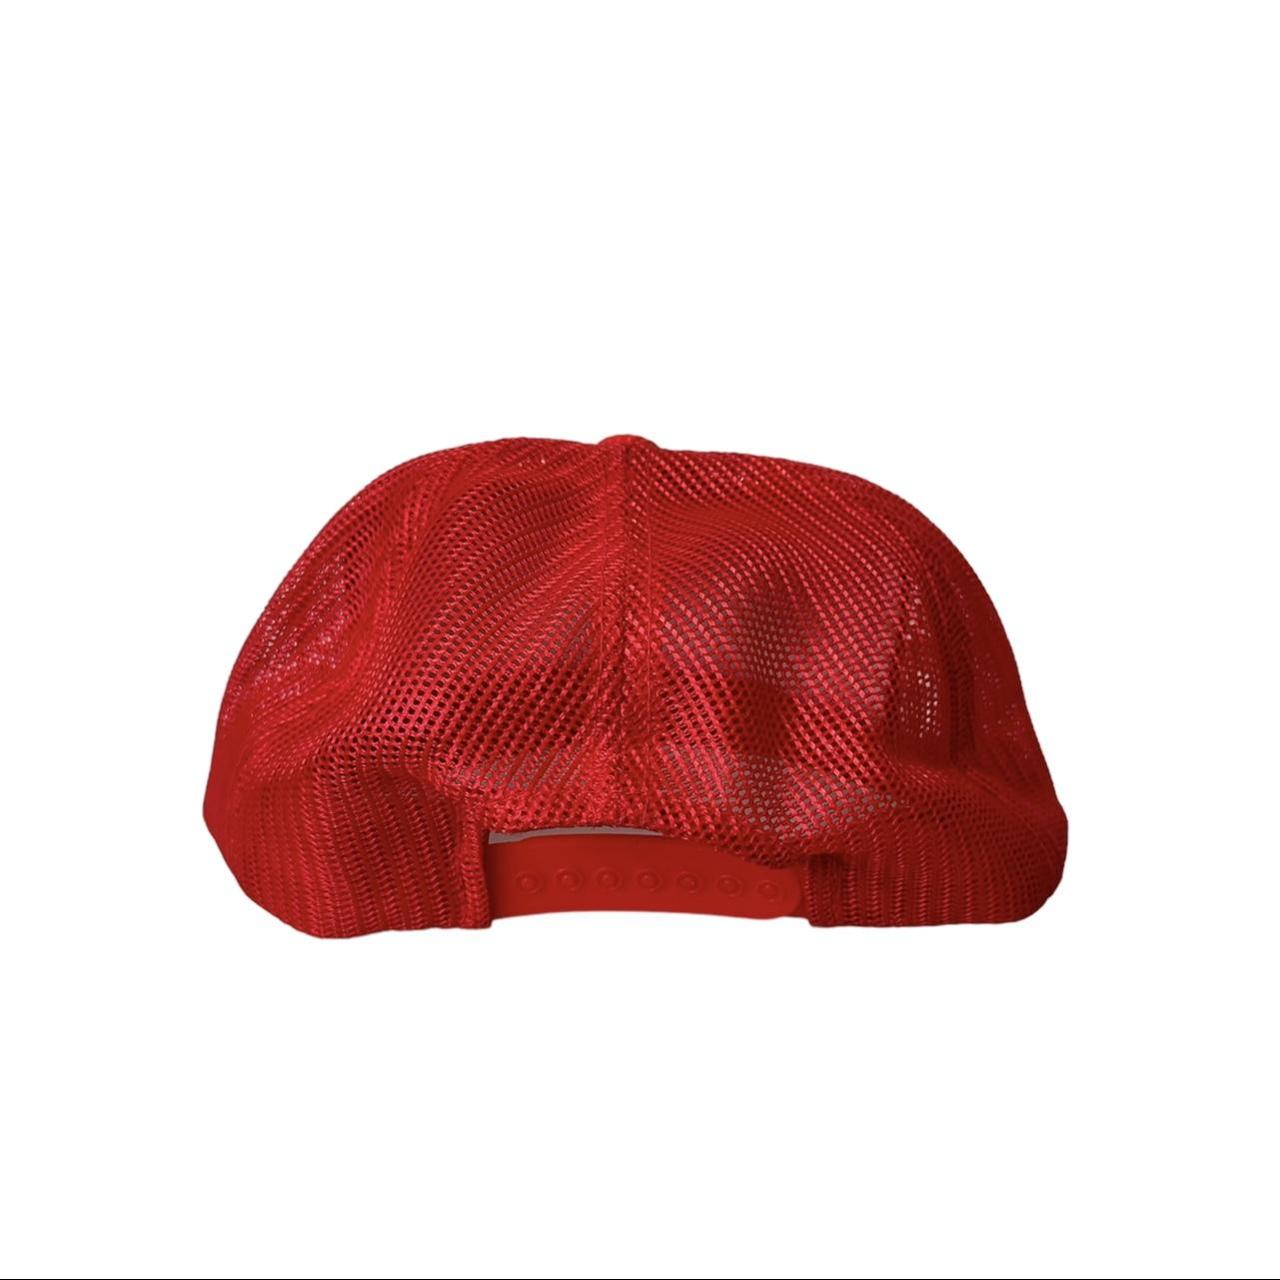 Ellesse Men's Red and White Hat (2)